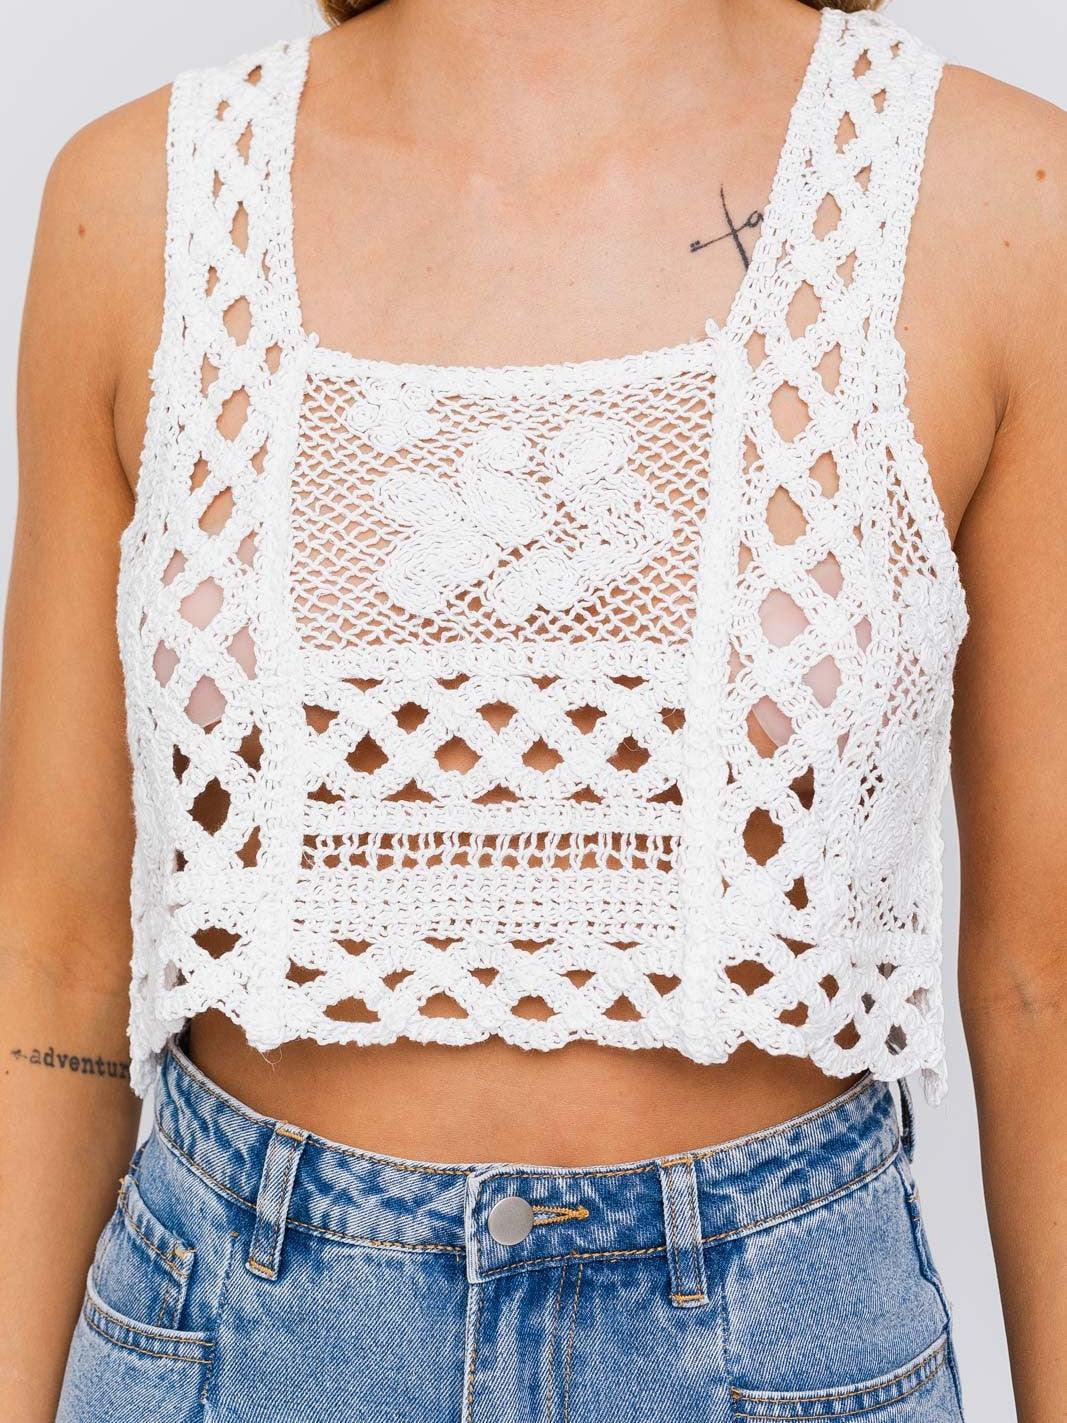 What Rules? Hollow Out Crop Top-Women's Clothing-Shop Z & Joxa